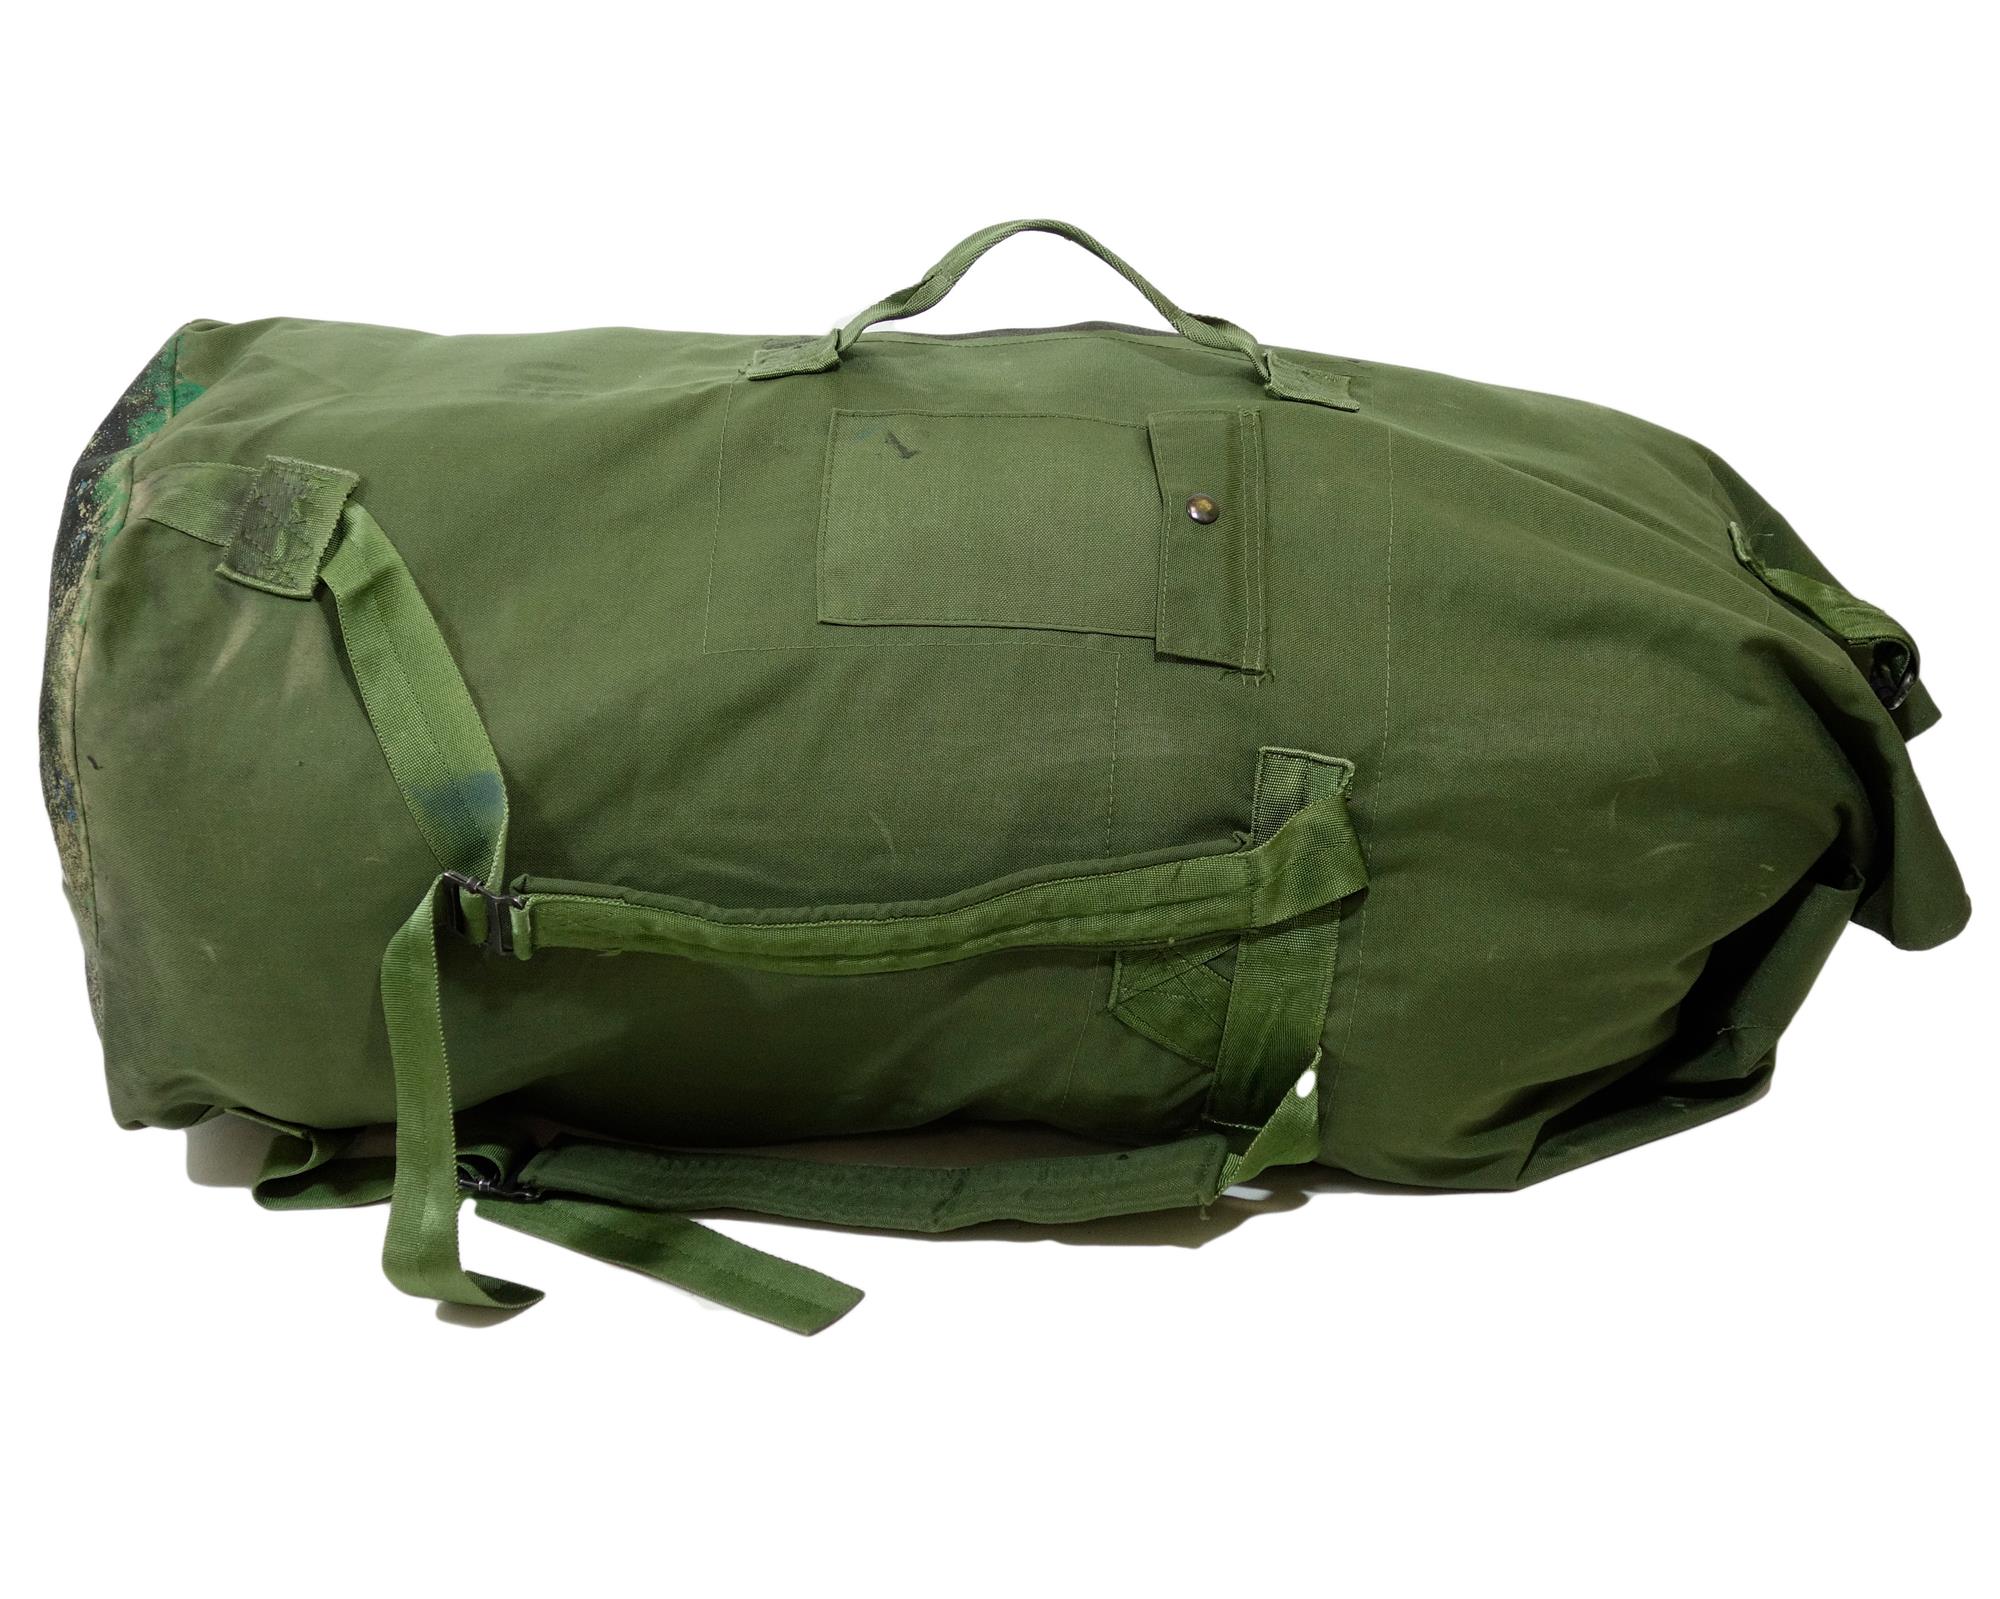 Large Army Duffle Bag - Army Military